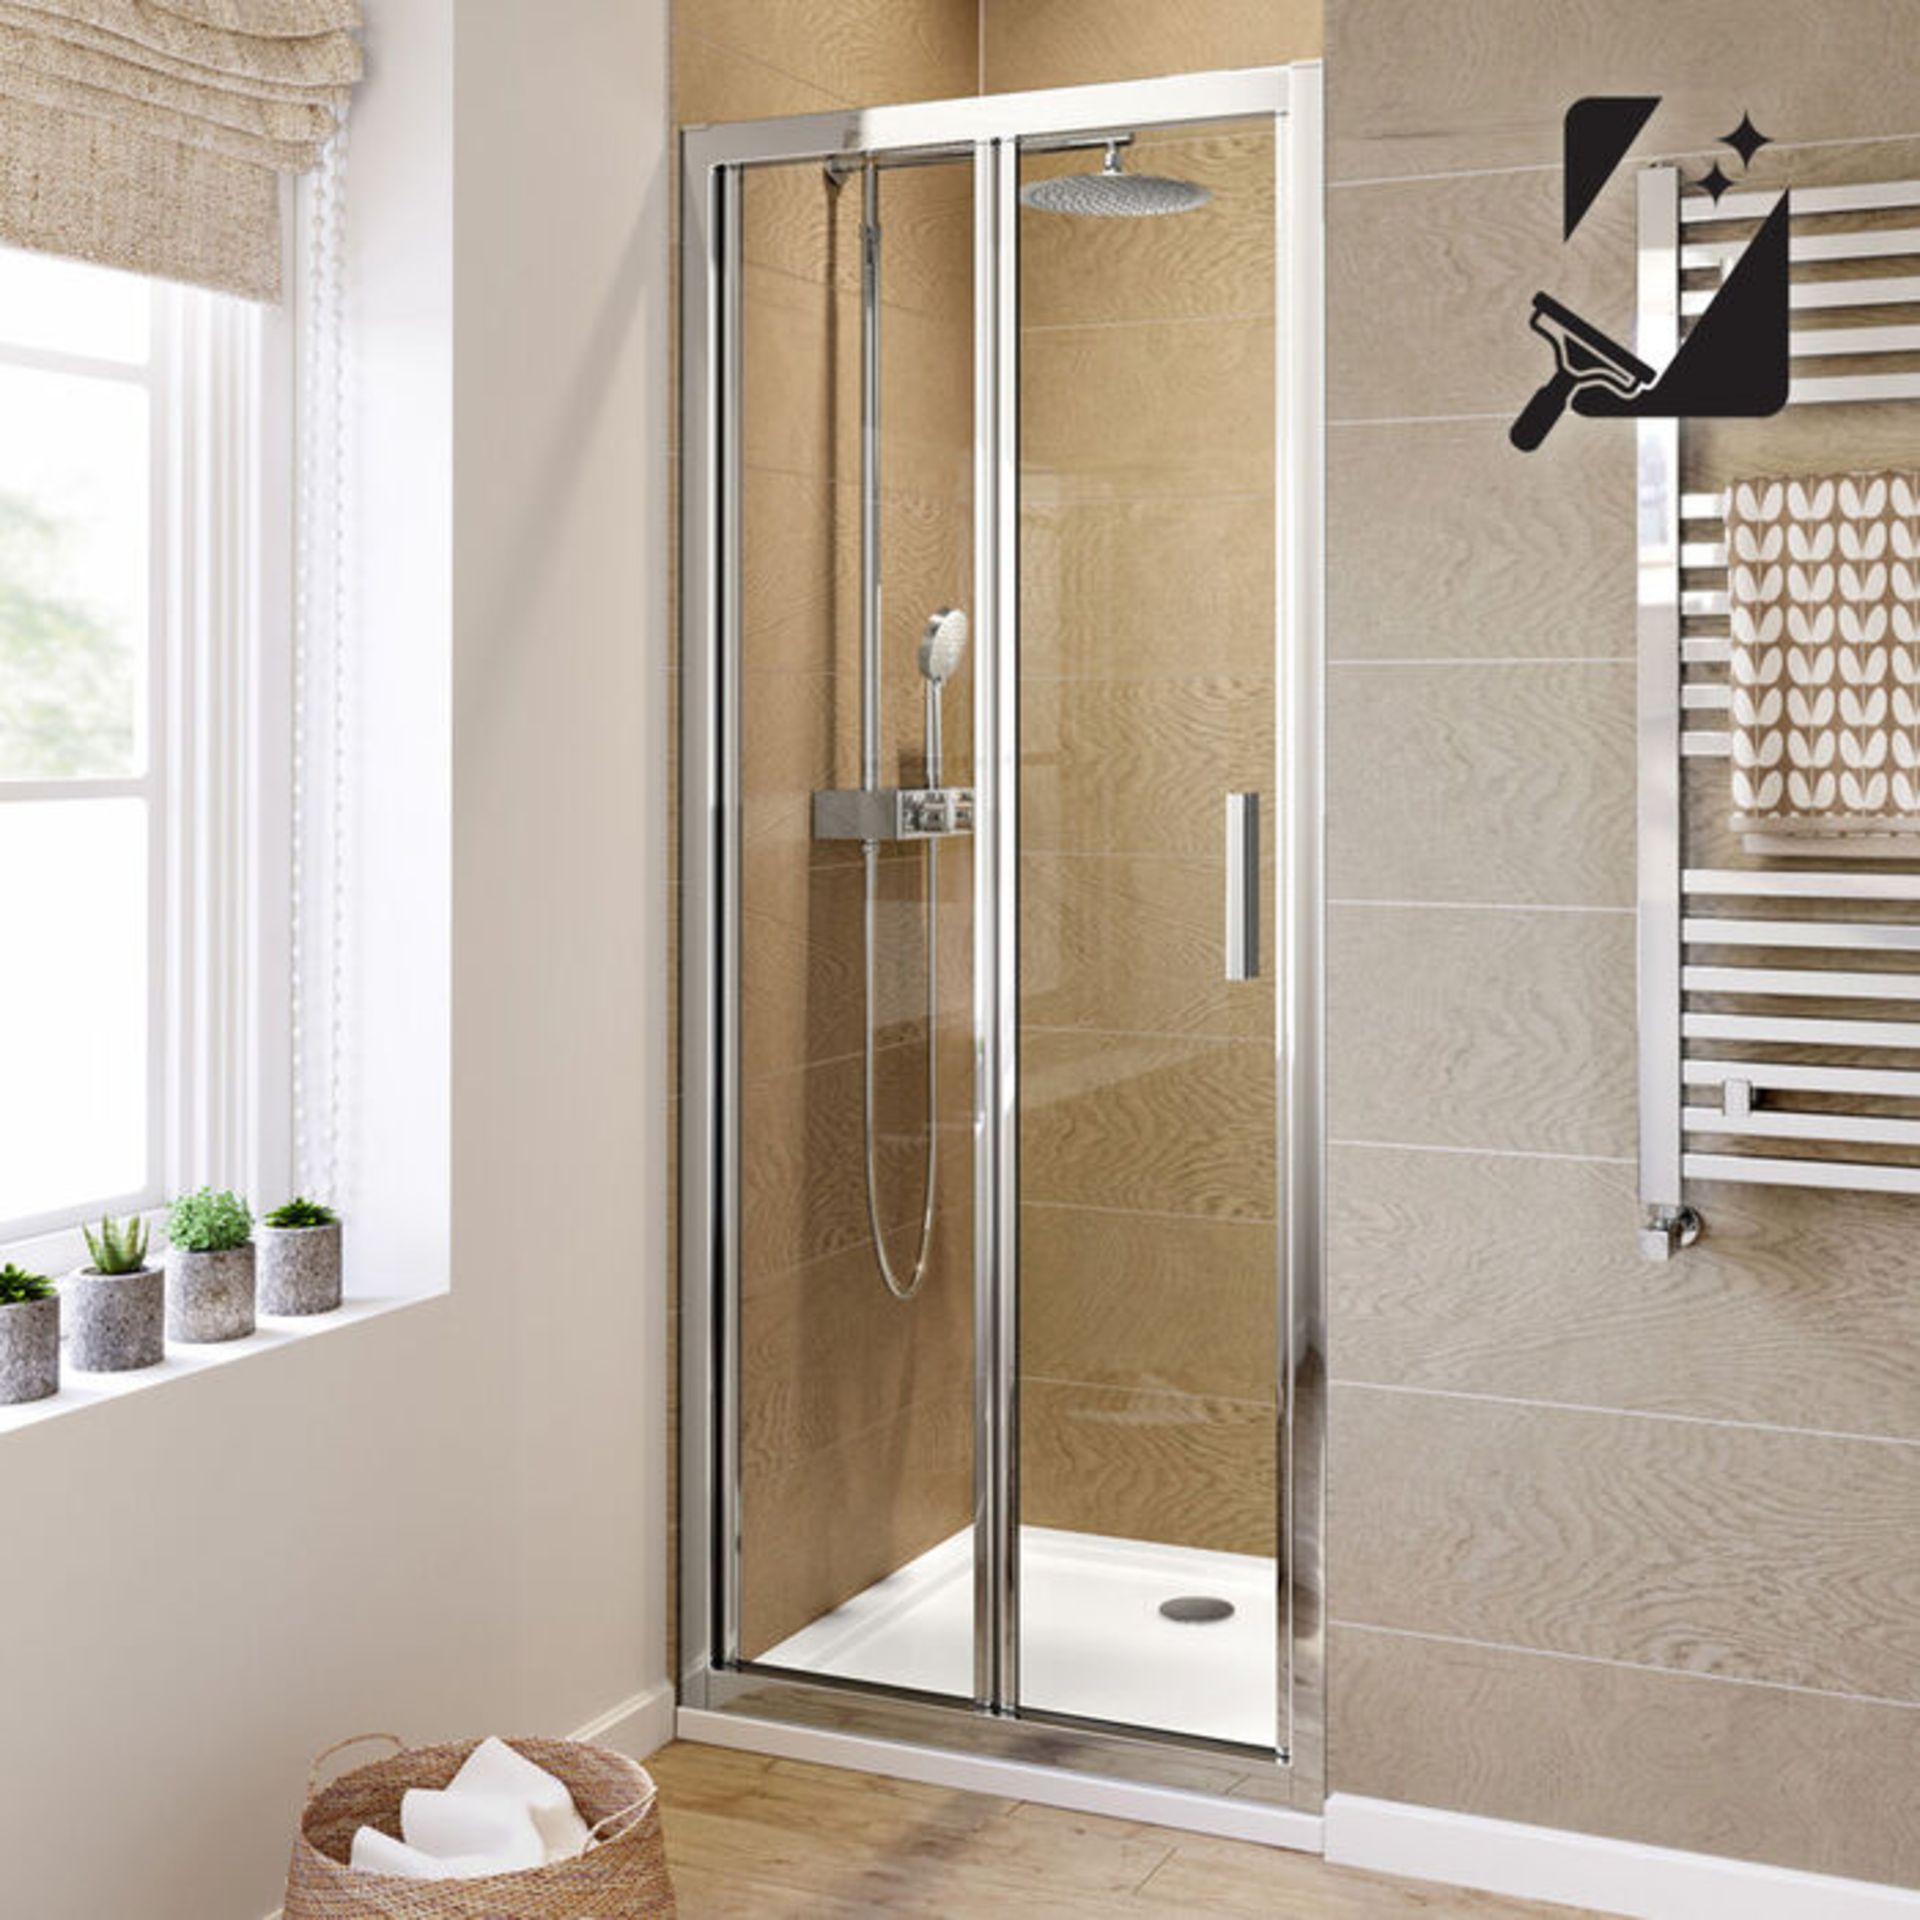 (H95) 800mm - 6mm - Elements EasyClean Bifold Shower Door. RRP £299.99. mm Safety Glass - Sing... - Image 5 of 5